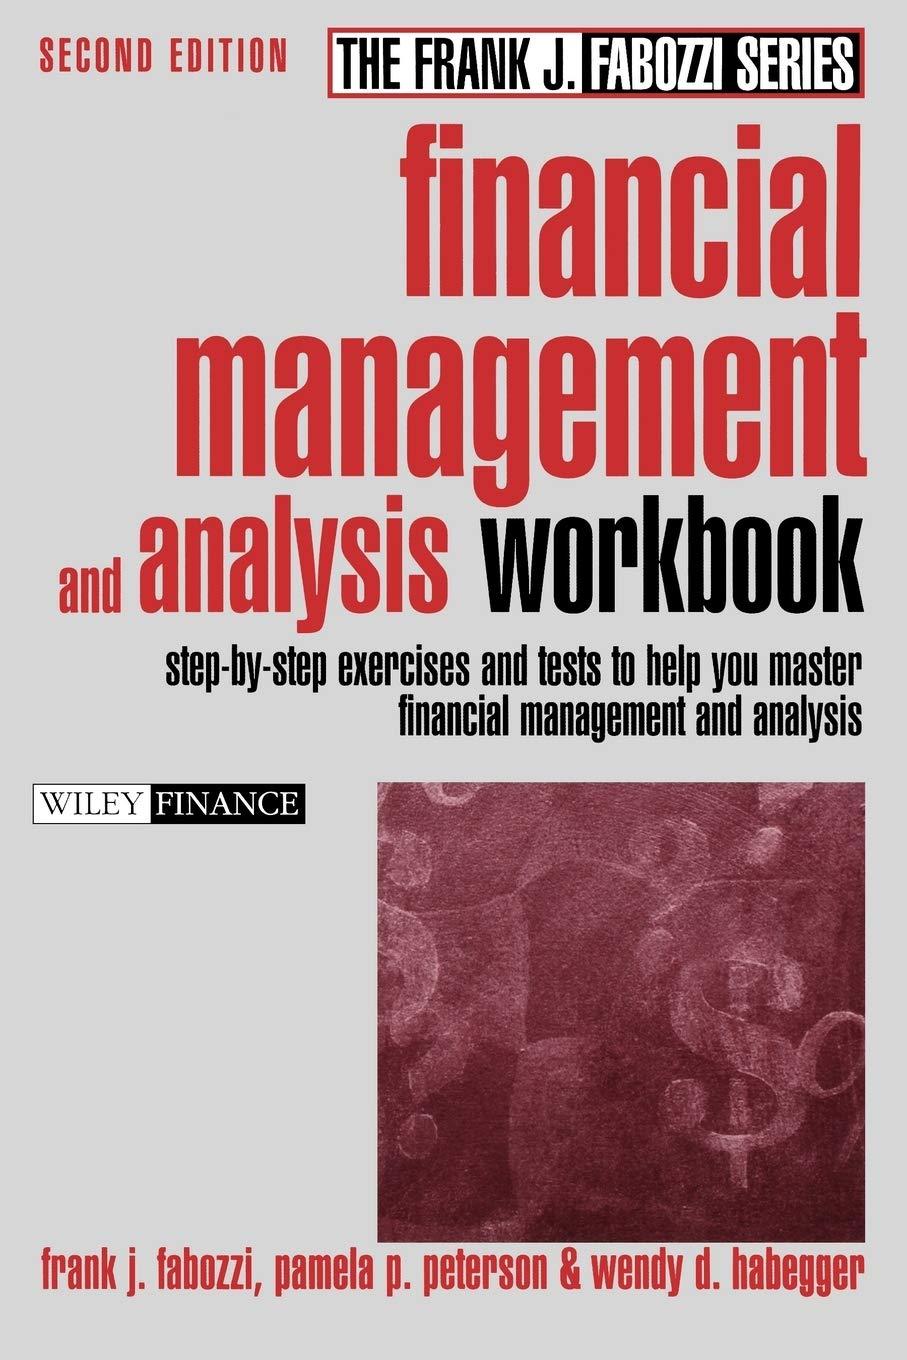 financial management and analysis worbook step by step exercises and tests to help you master financial